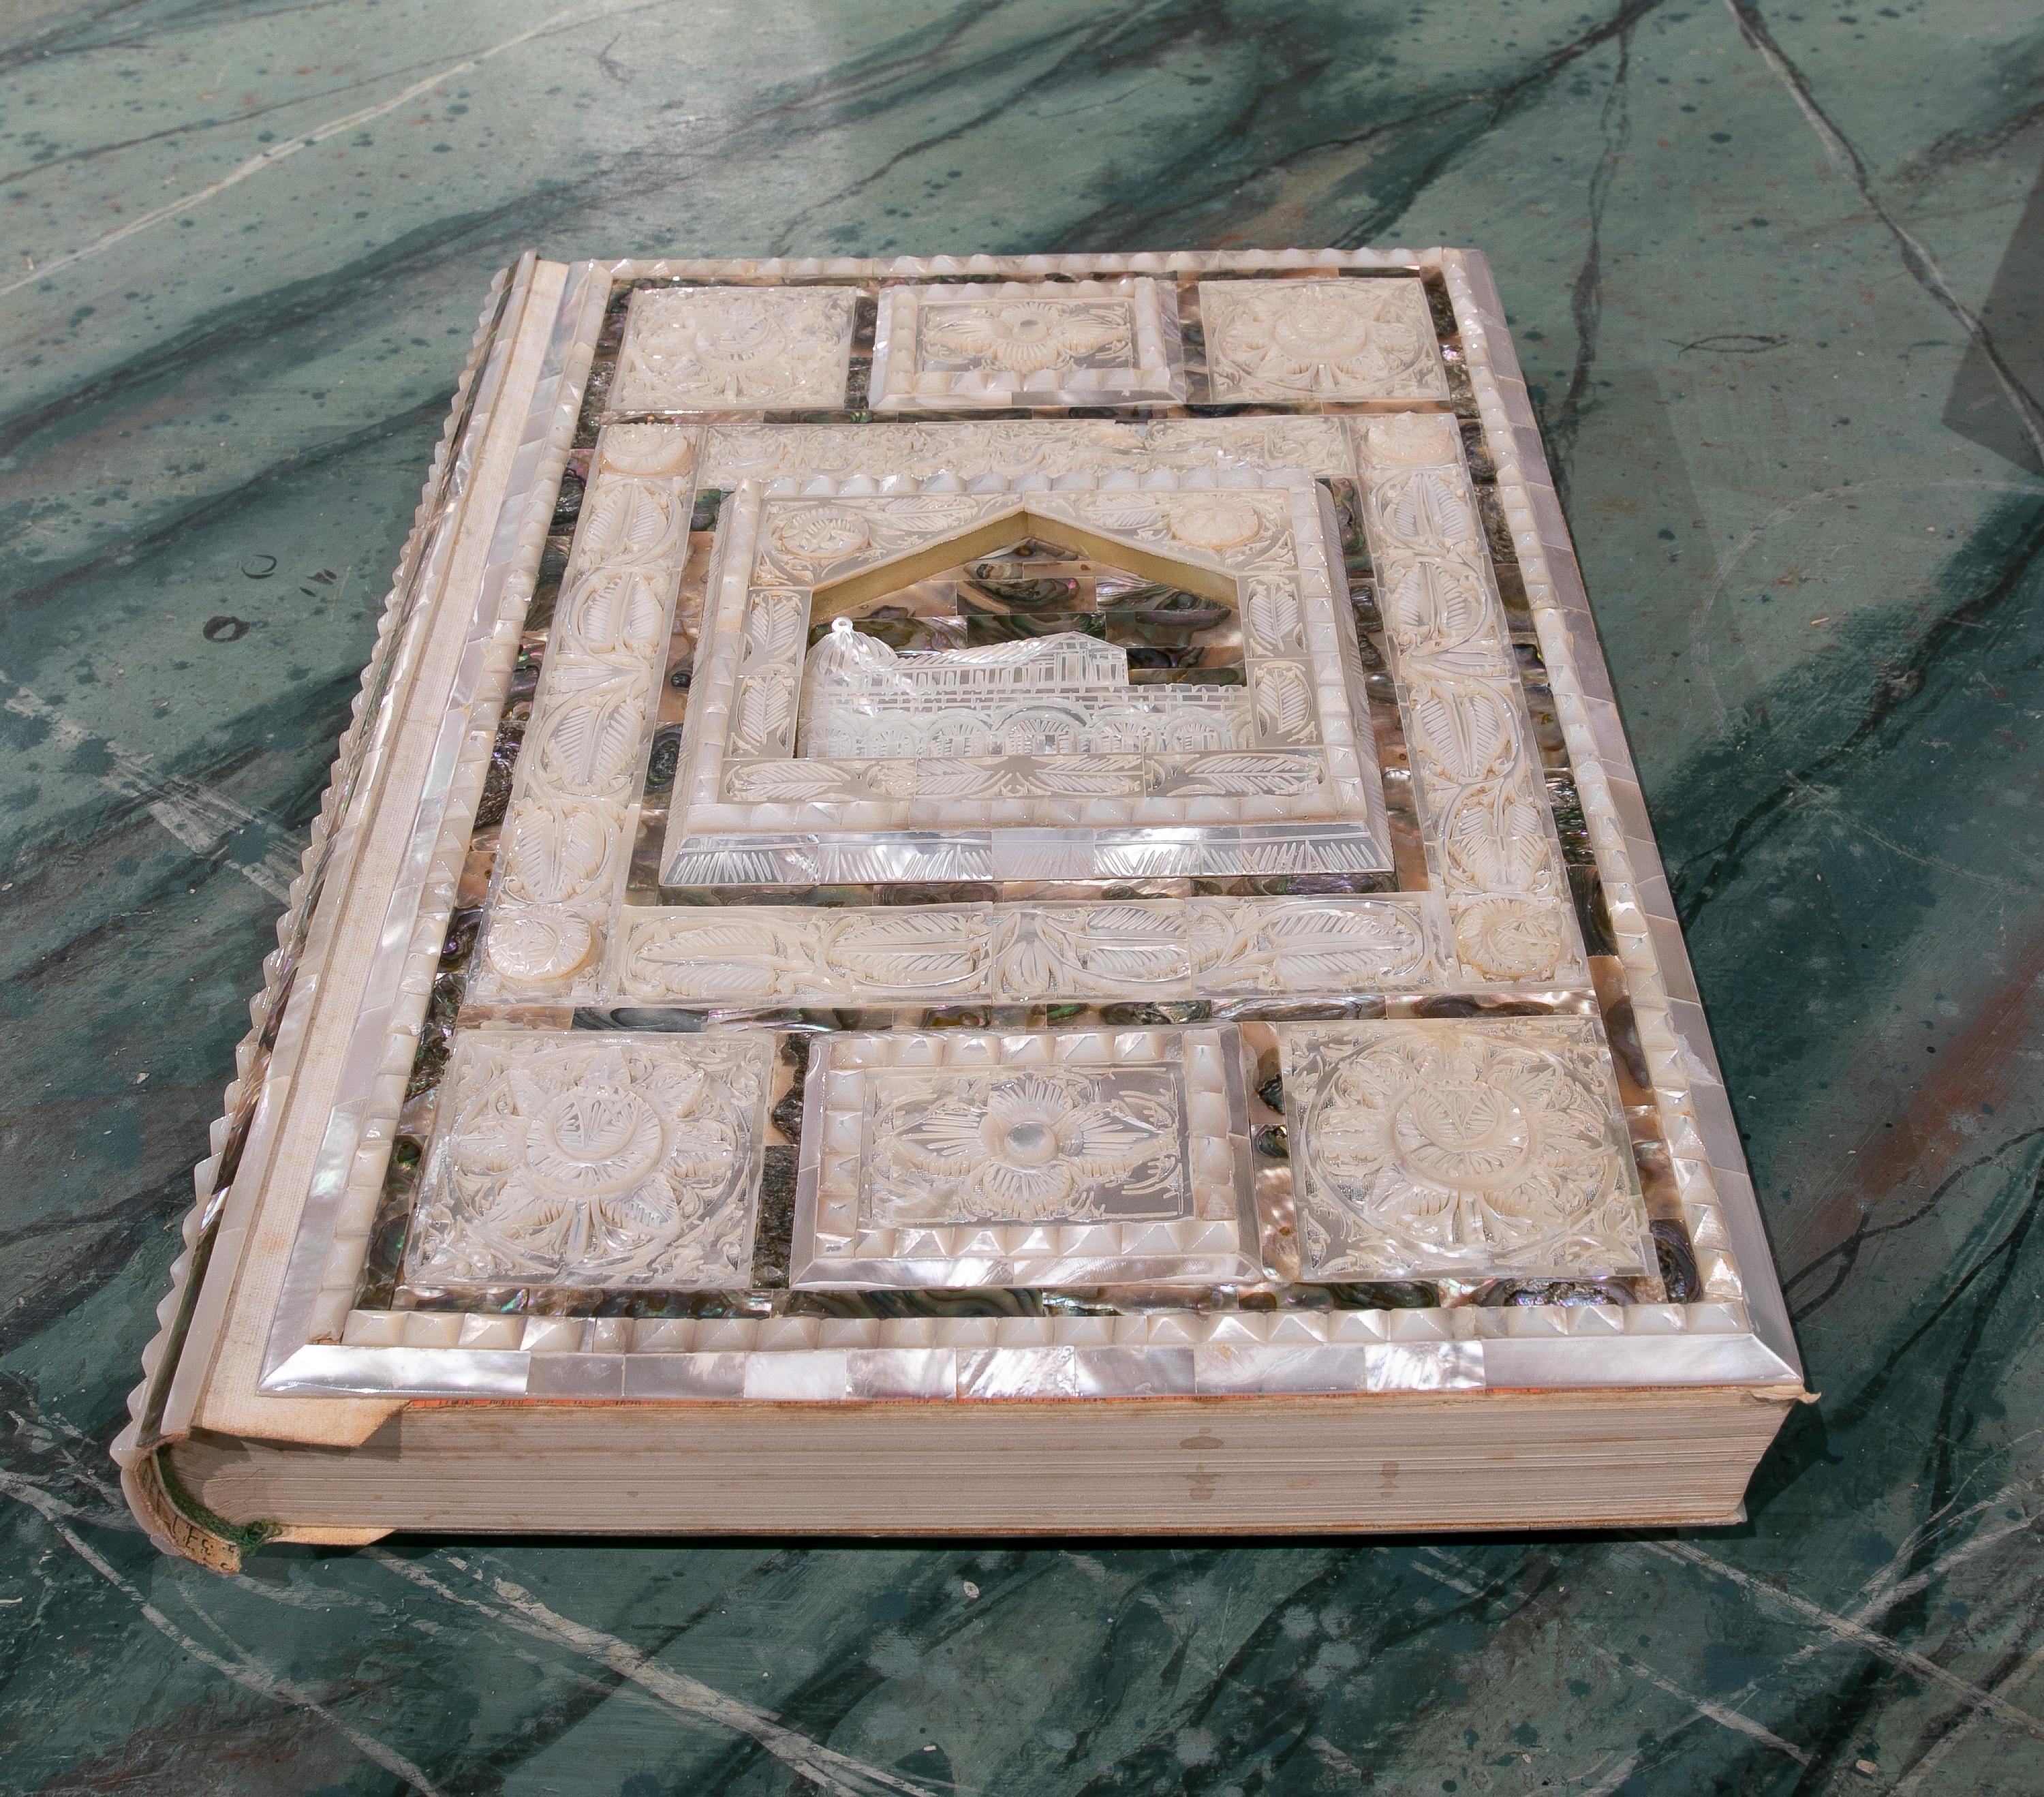 20th Century Unique Quran Book with Carved Mother of Pearl Covers and Lockable Box